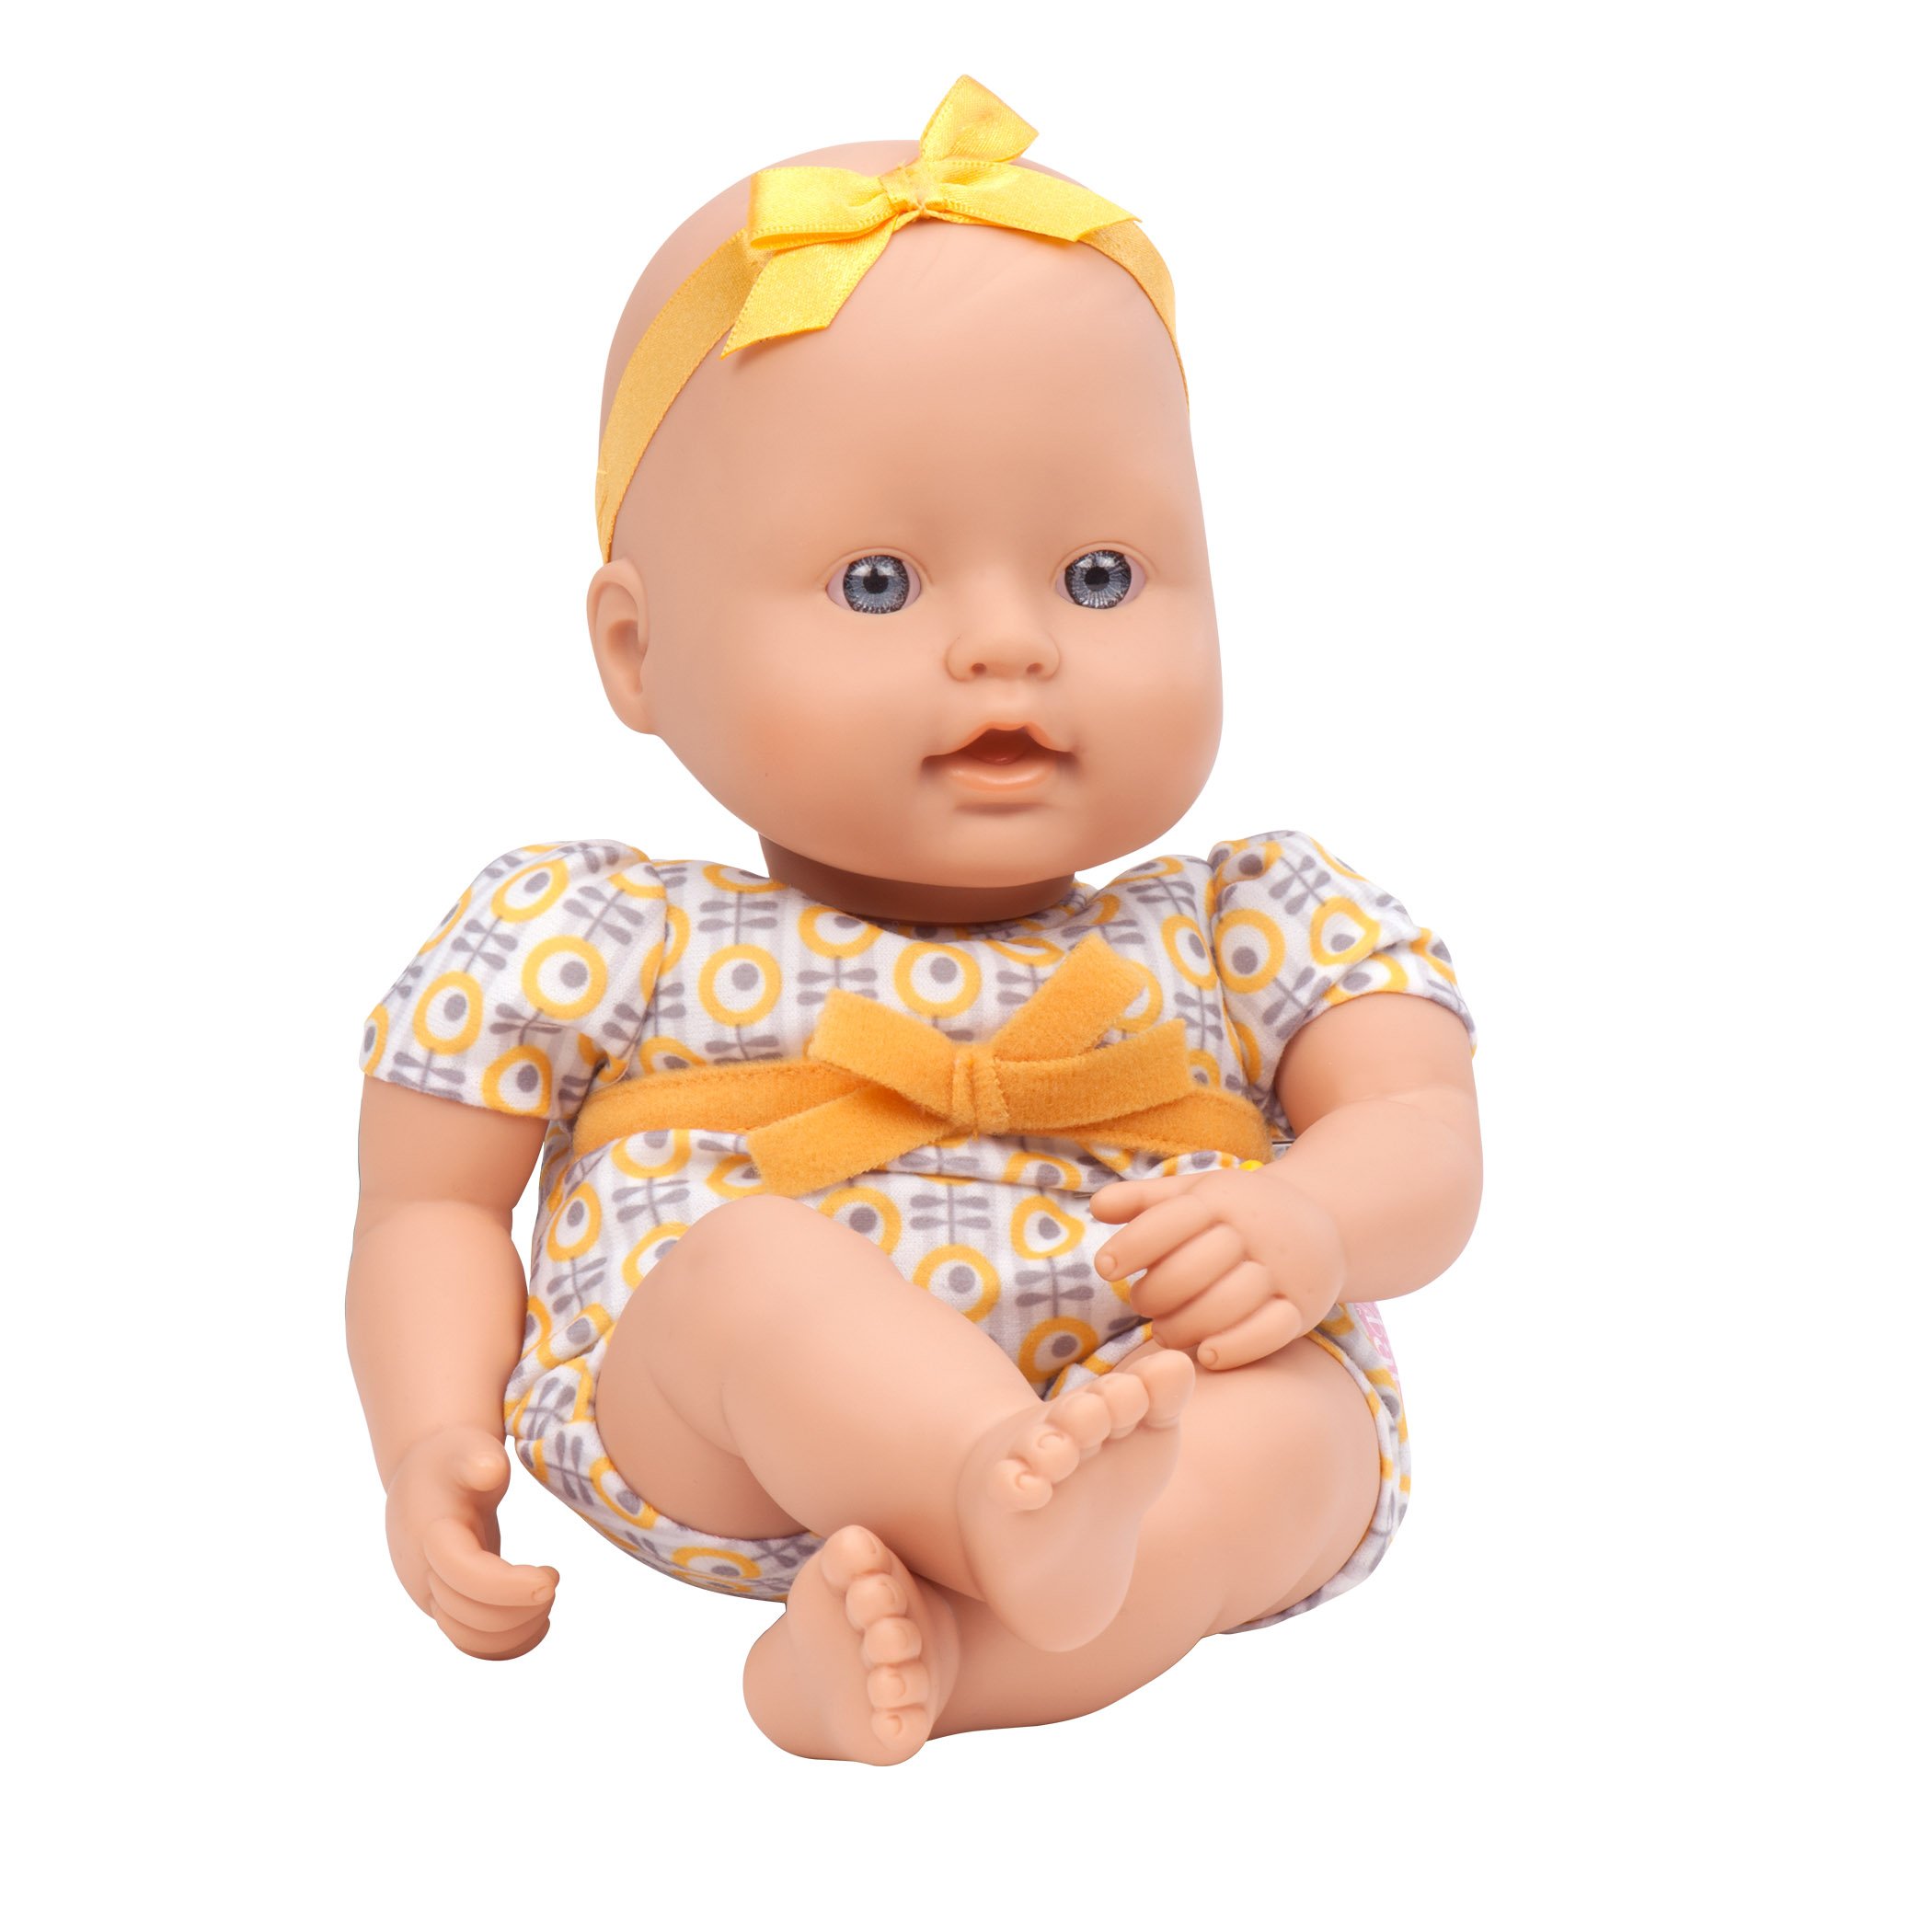 Baby Sweetheart by Battat - Feeding Time 12-inch Soft-Body Newborn Baby Doll with Easy-to-Read Story Book and Baby Accessories